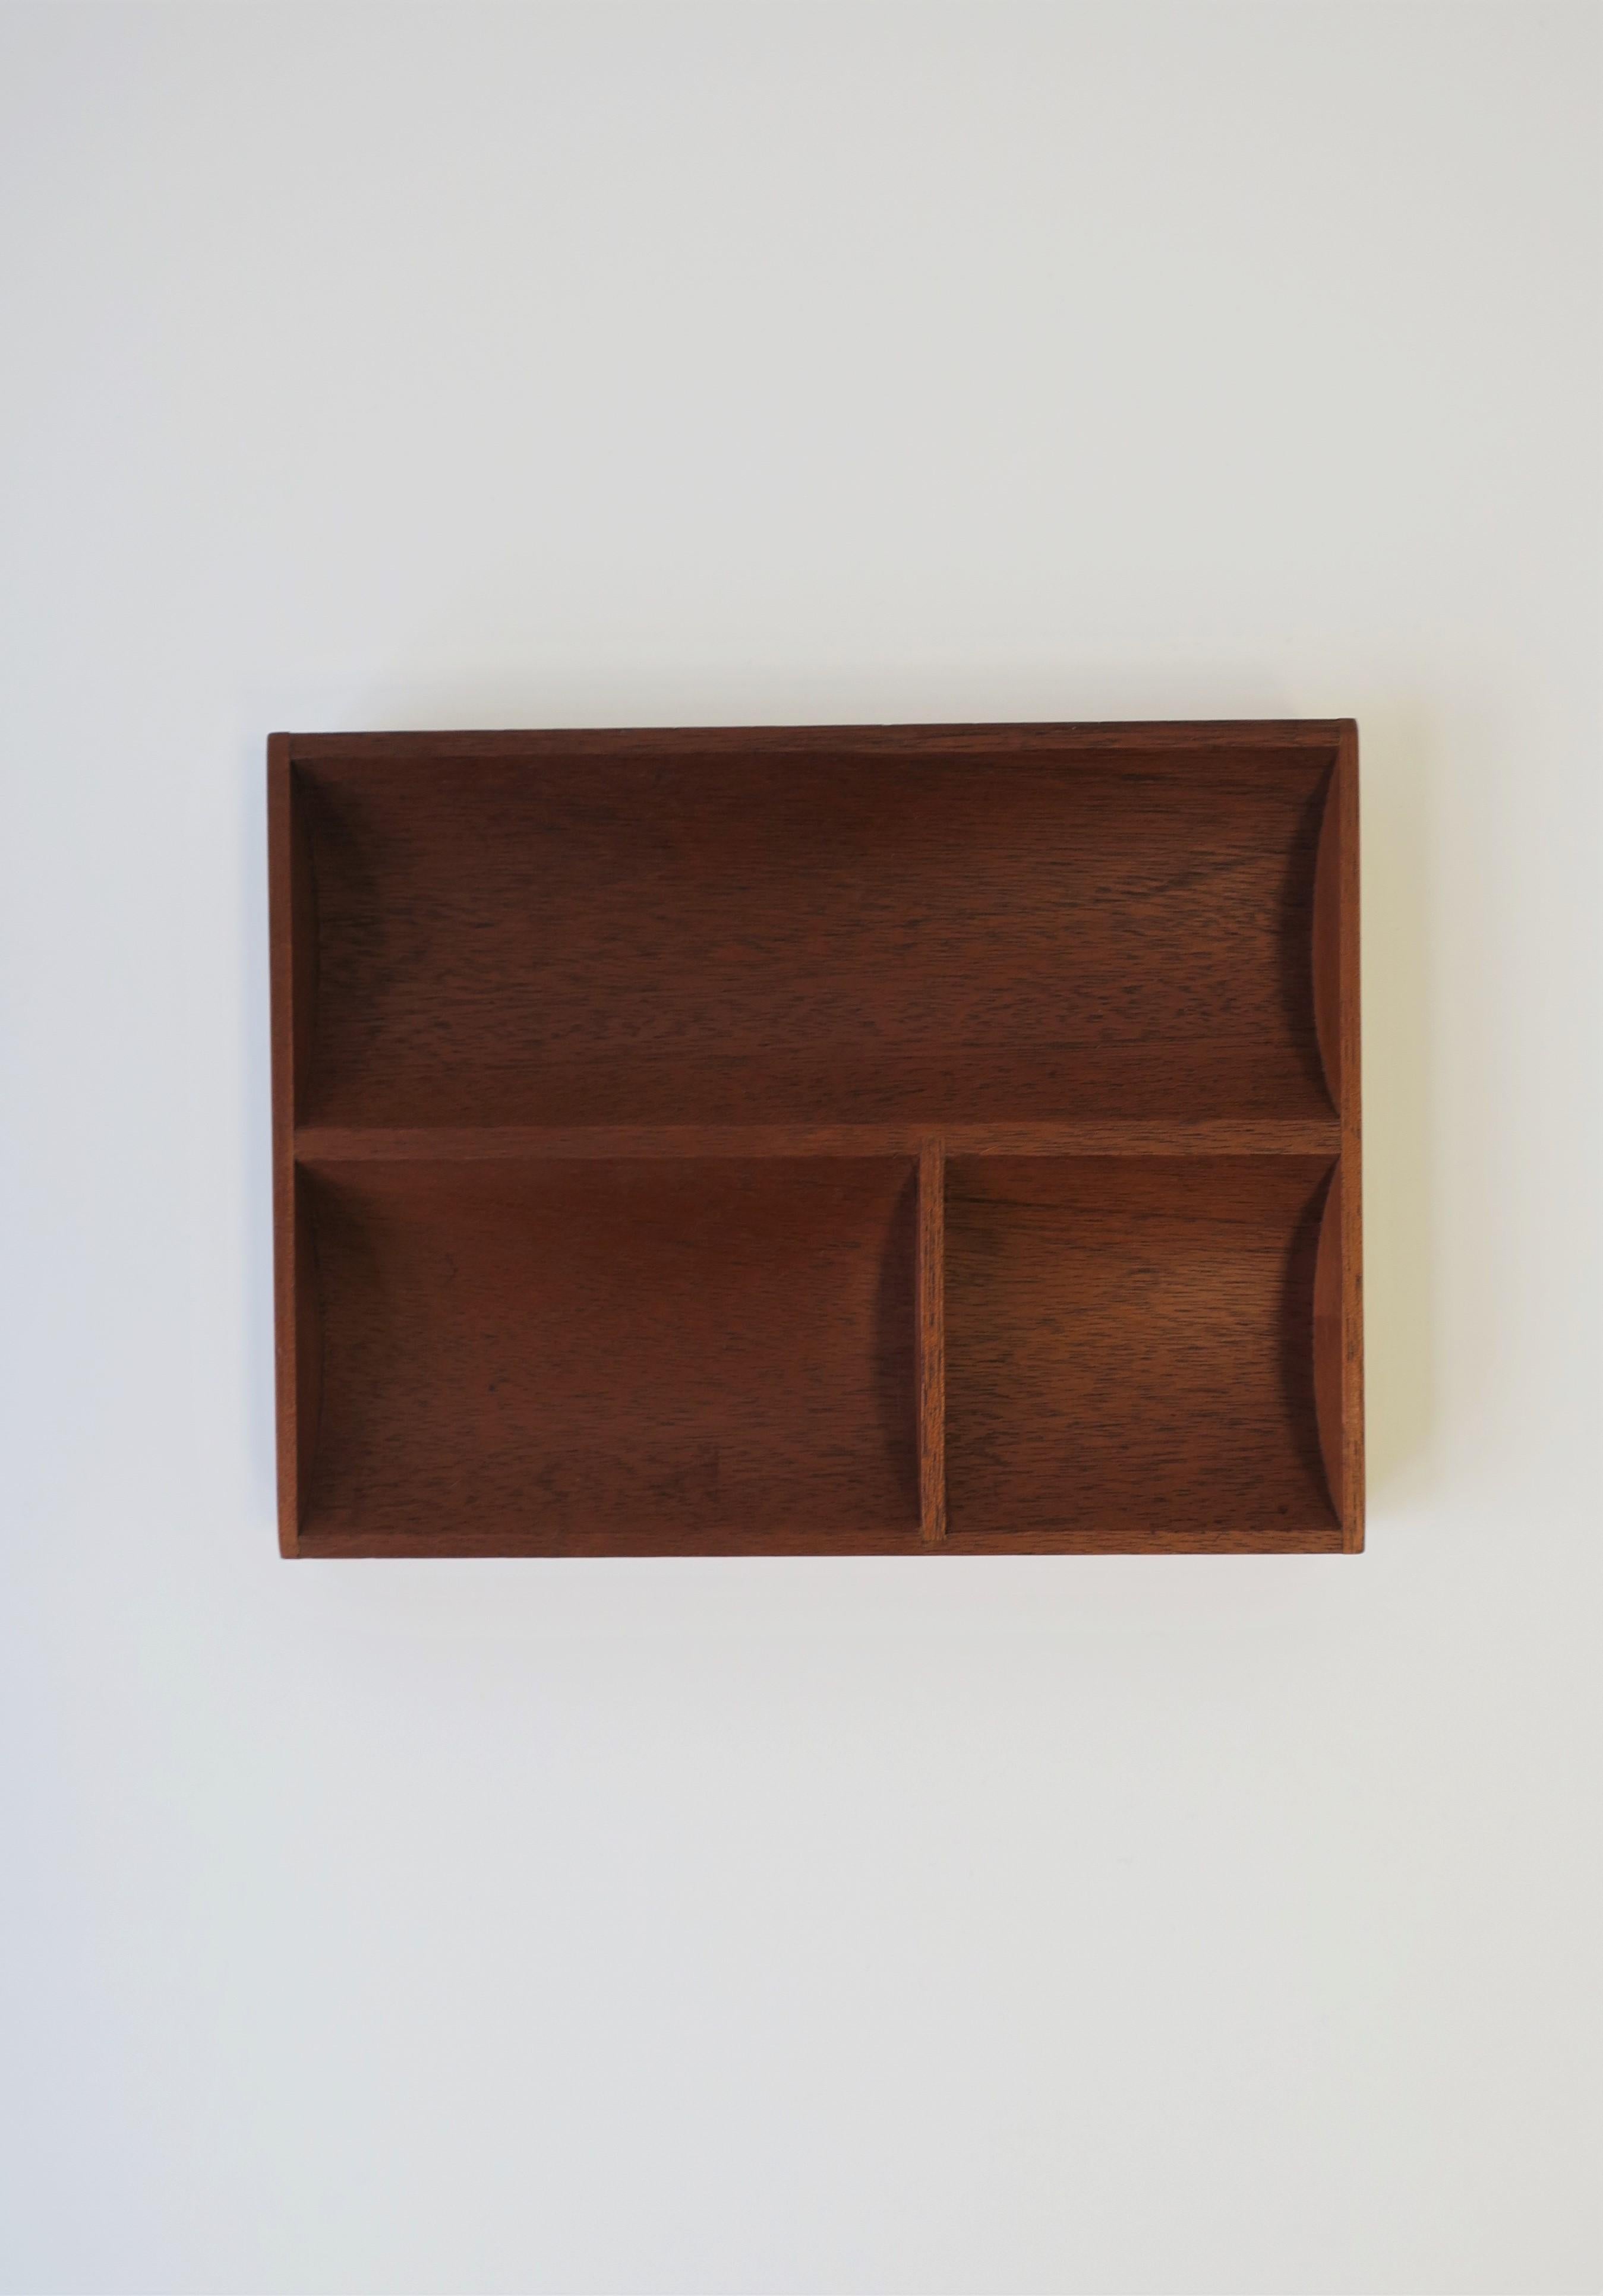 A Mid-Century Modern period or Minimalist style desk or vanity teak wood tray organizer. Piece has three compartment and can work well on a desk or on a vanity, nightstand table, walk-in-closet, etc., for jewelry and more as demonstrated in images.